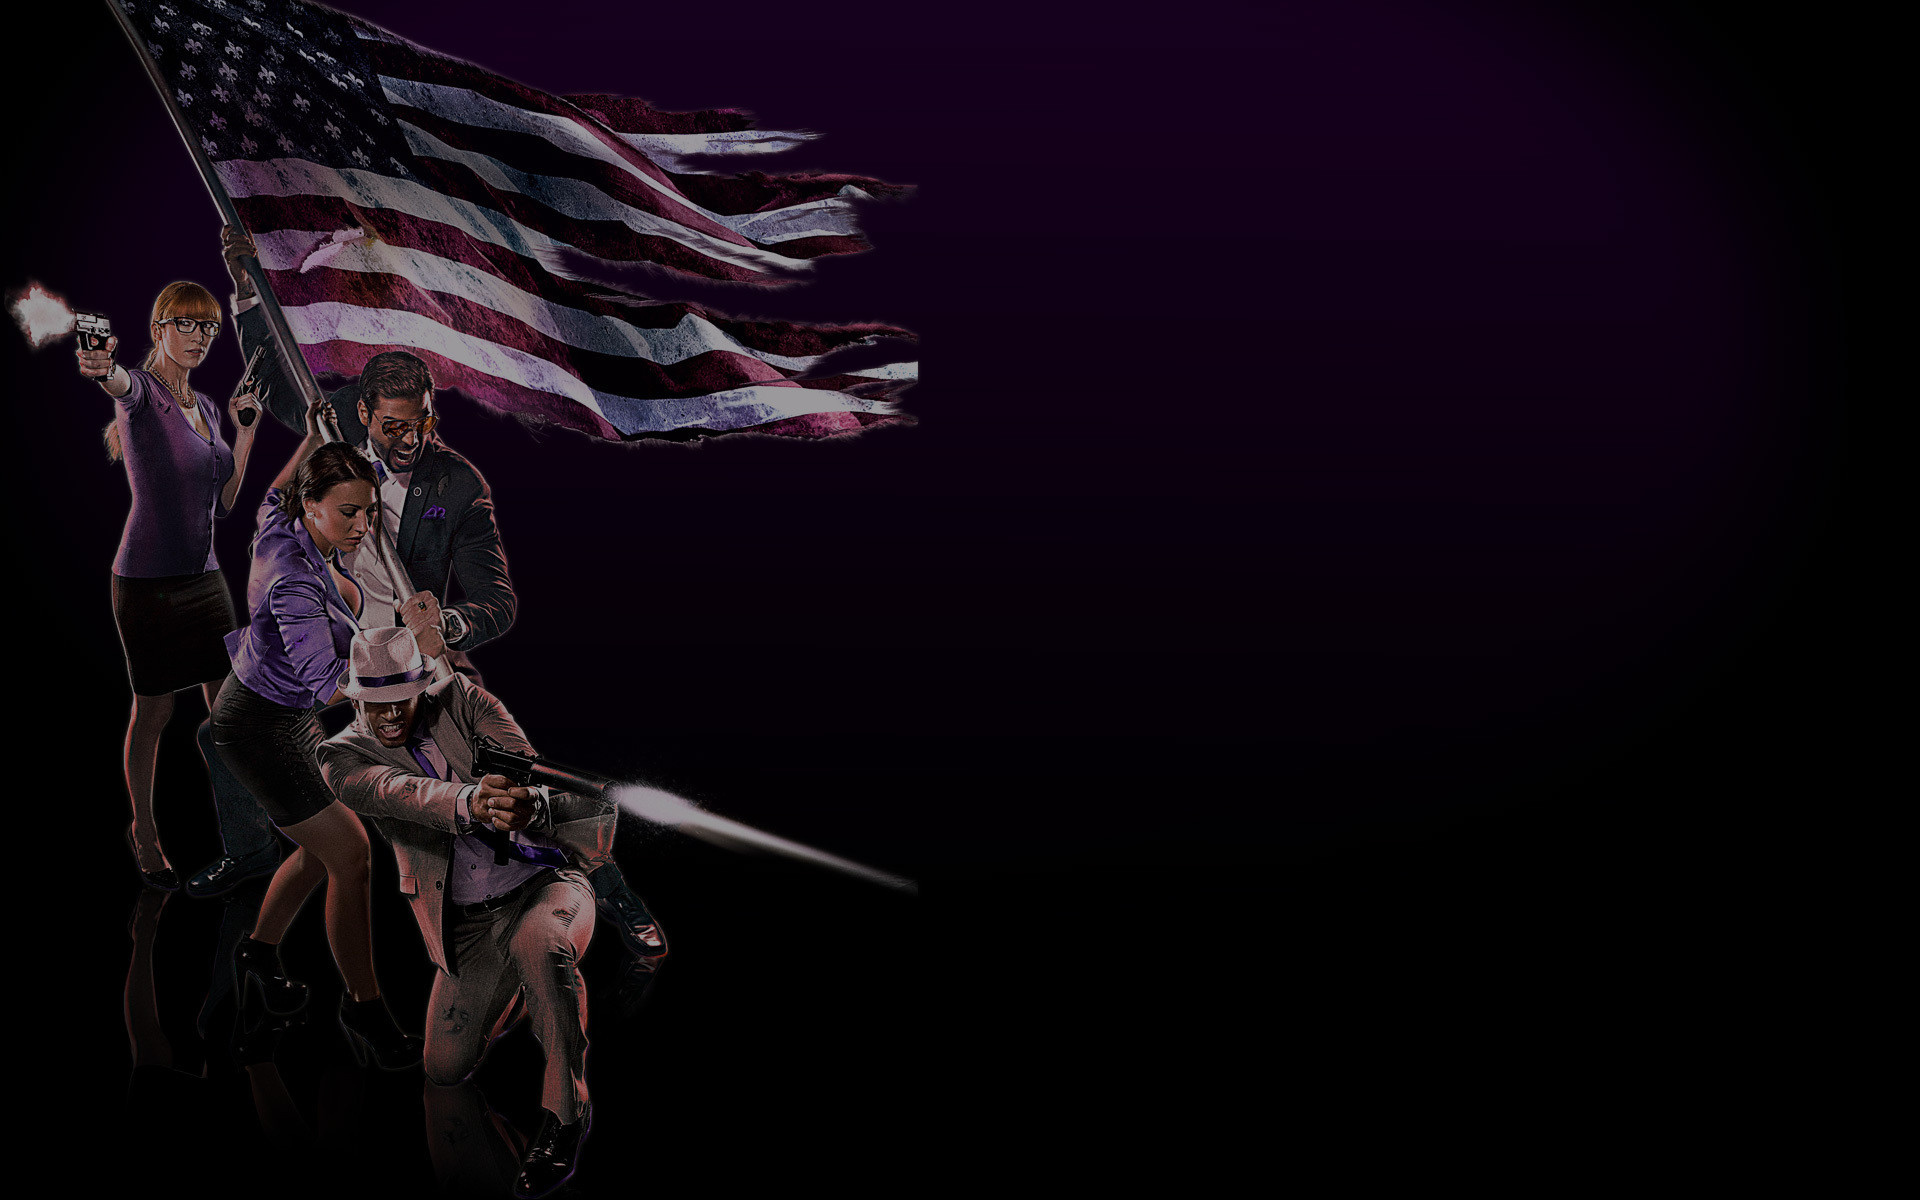 1920x1200 free screensaver wallpapers for saints row iv, 220 kB - Berry Walls